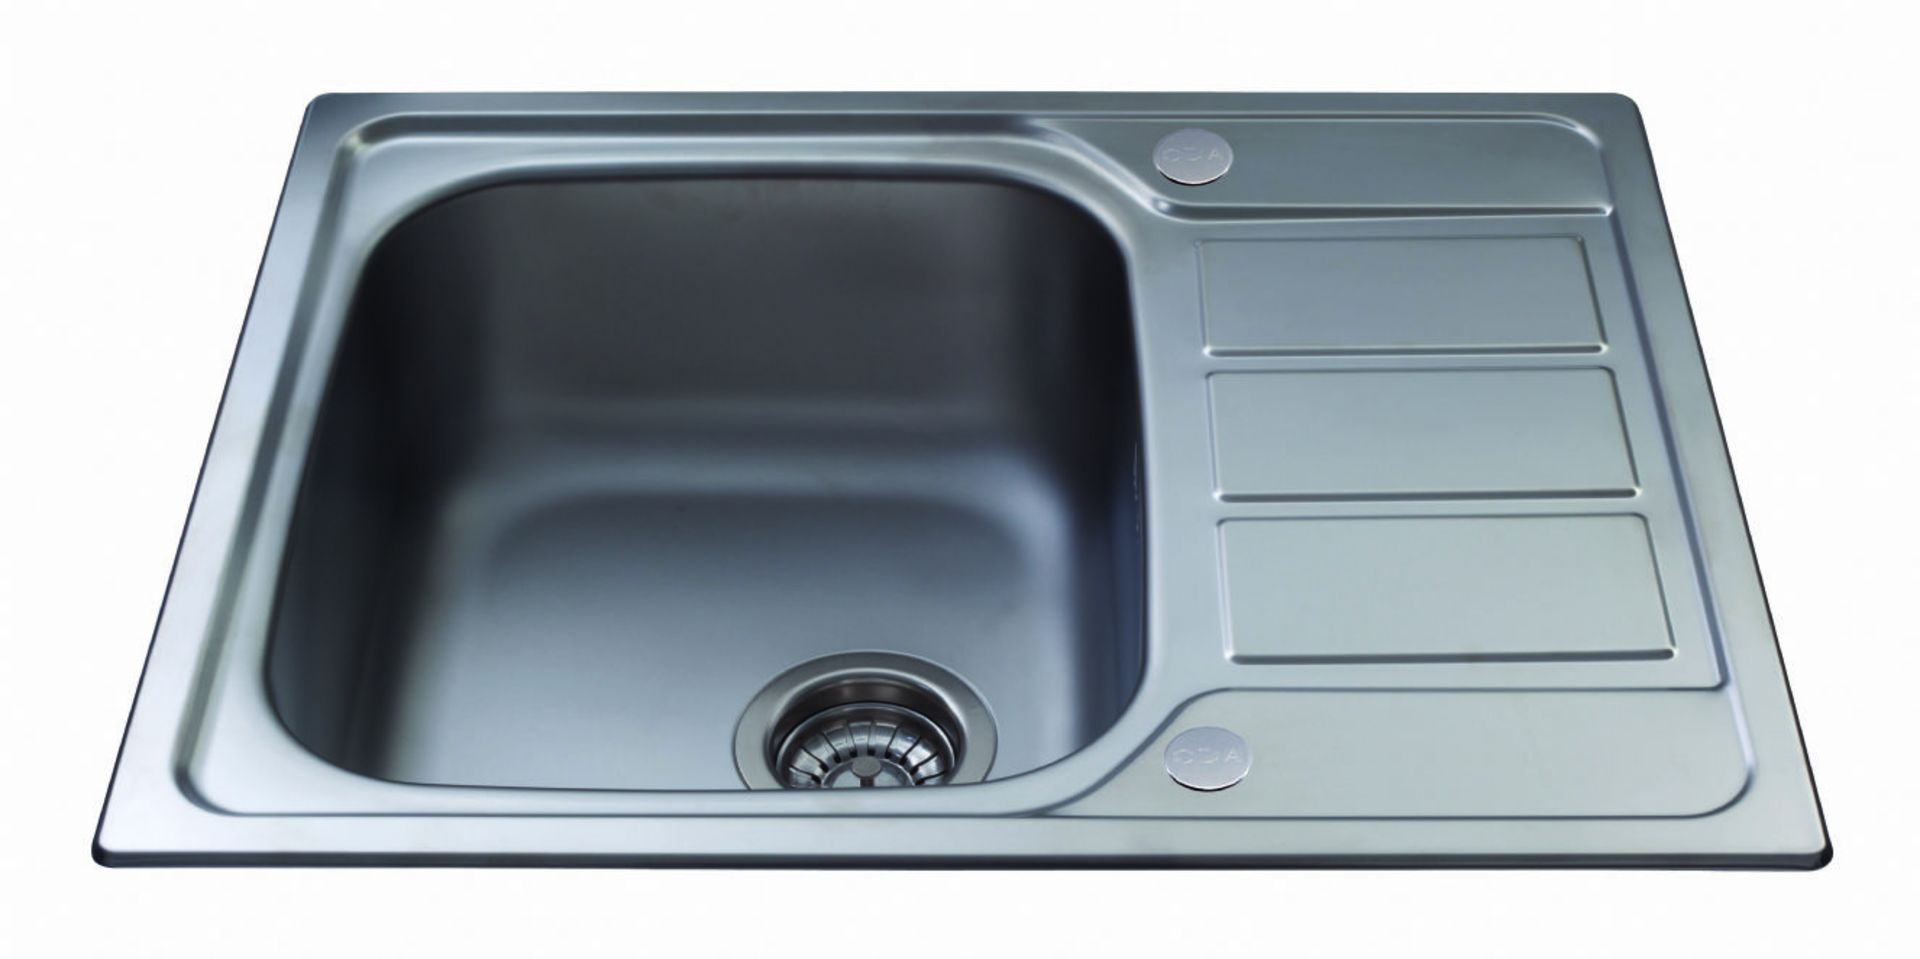 + VAT Brand New CDA Stainless Steel Kitchen Single Bowl Sink With Mini Drainer - Corrosion & Rust